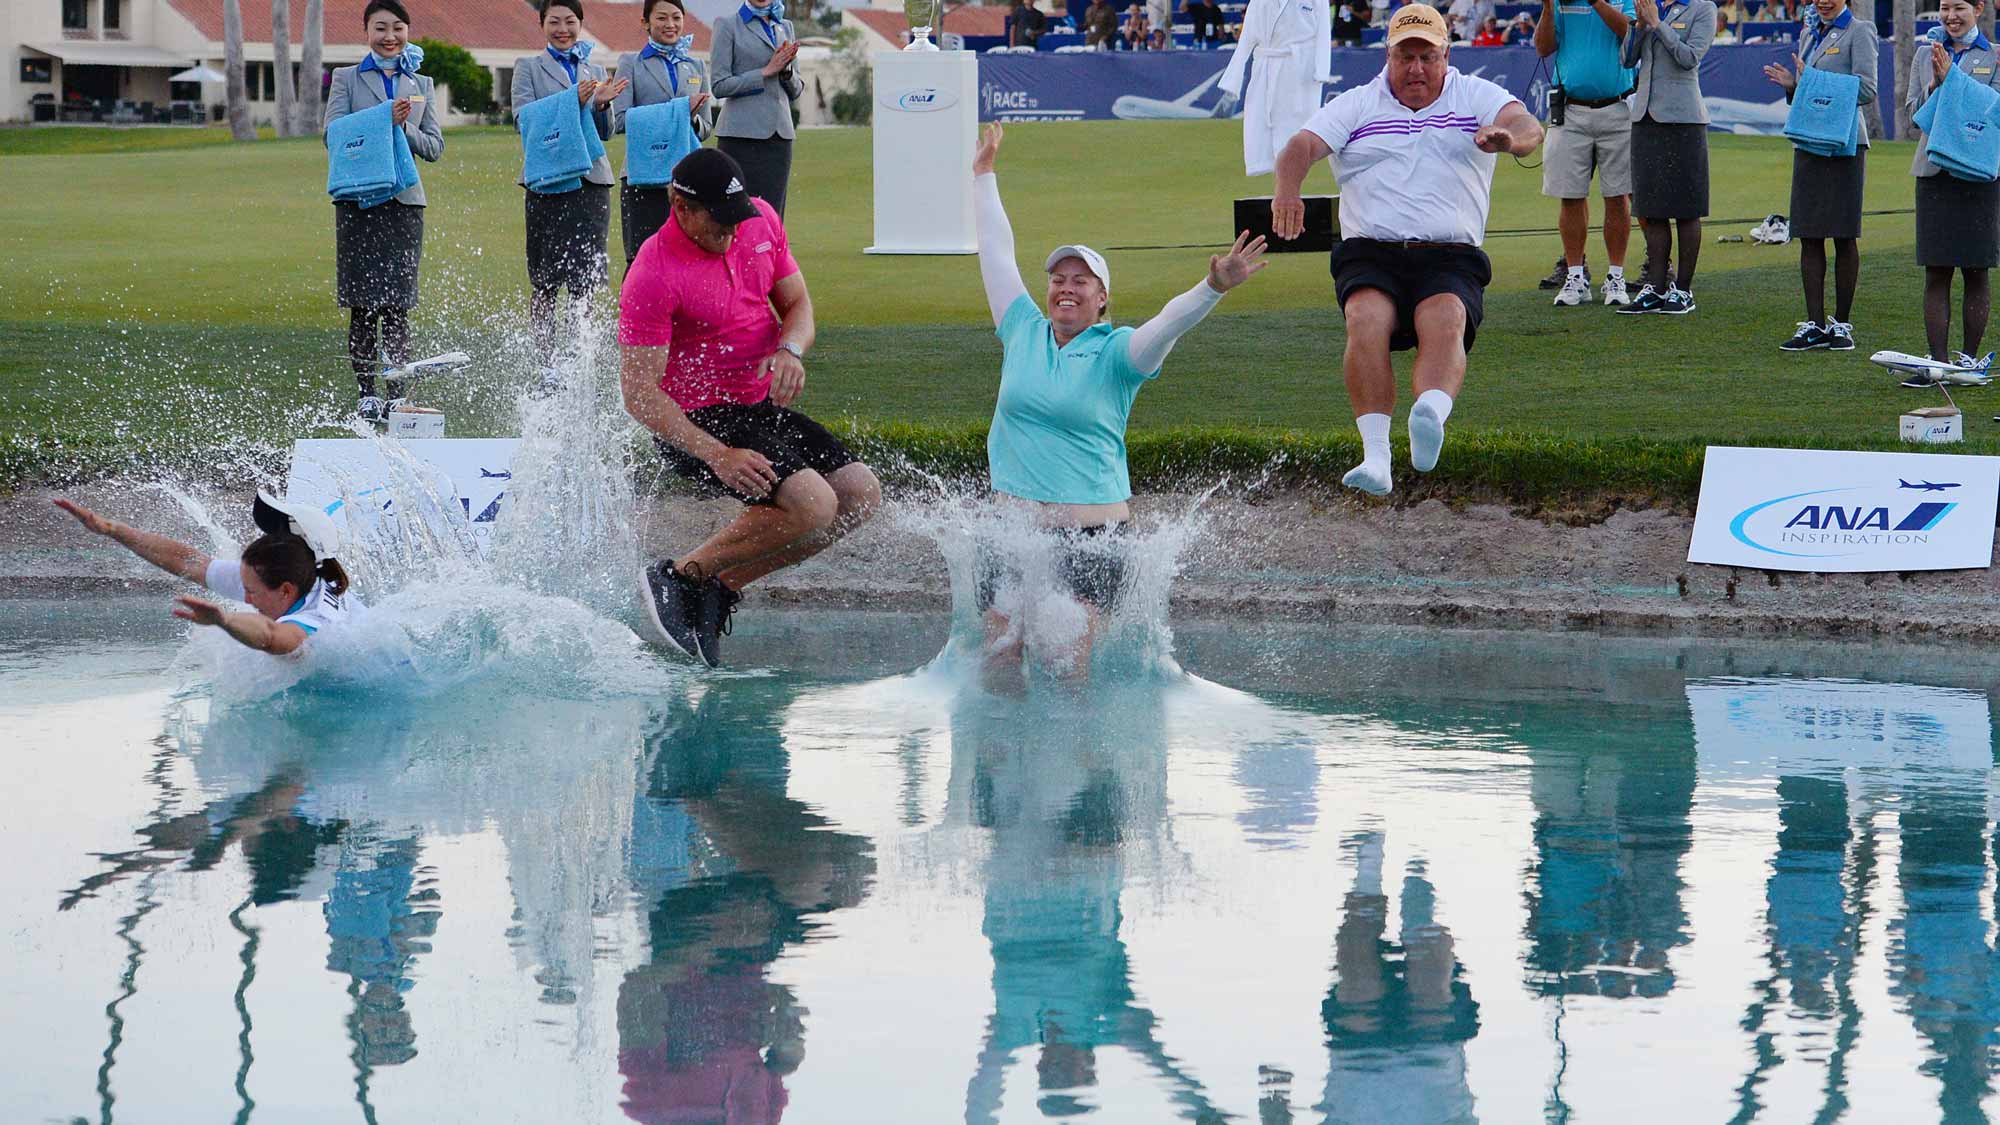 Brittany Lincicome jumps in the water with from left to right, her caddie Missy Pederson, her fiance Dewald Gouws and her father Tom Lincicome after winning the ANA Inspiration